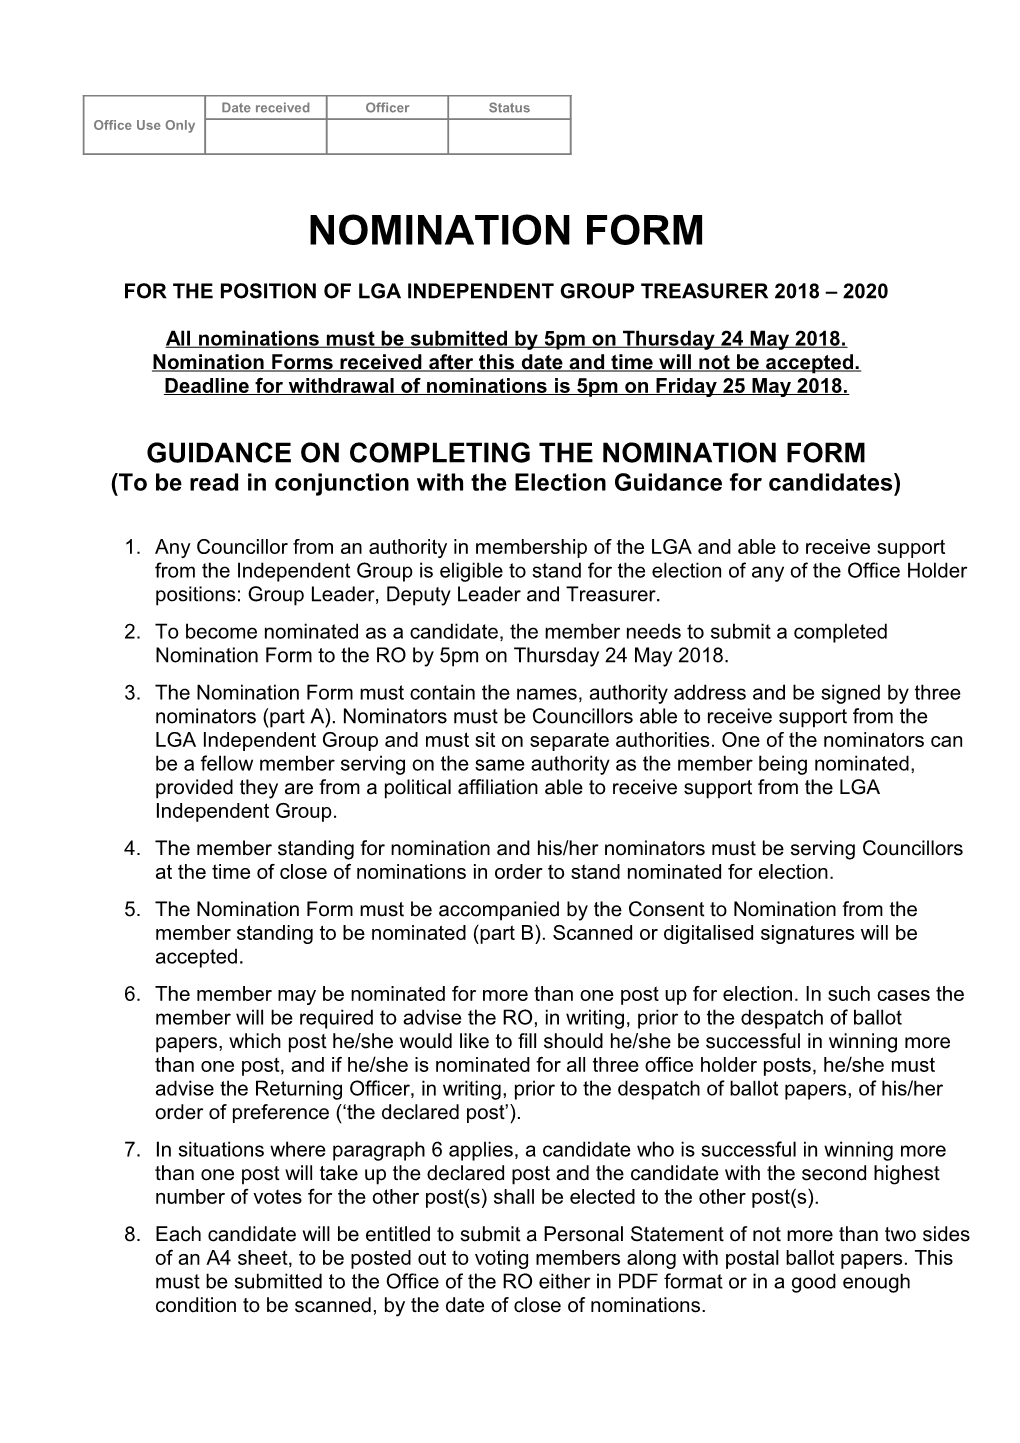 Nomination Form for the Position of Lga Independent Group Chairman 2008-09